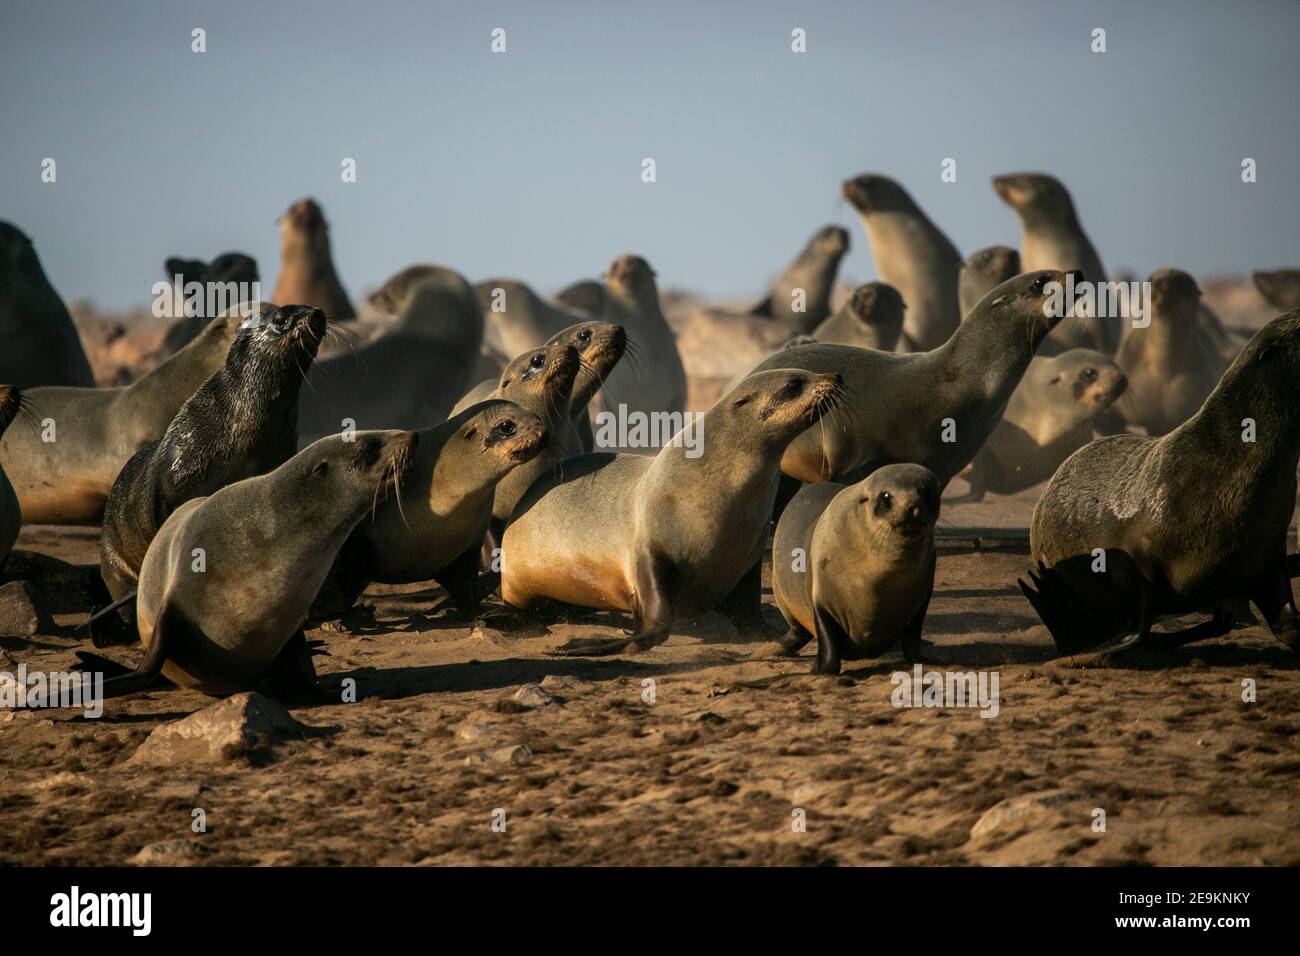 Cape fur seal colony at Cape Cross in Skeleton Coast of Namibia, Southern Africa Stock Photo